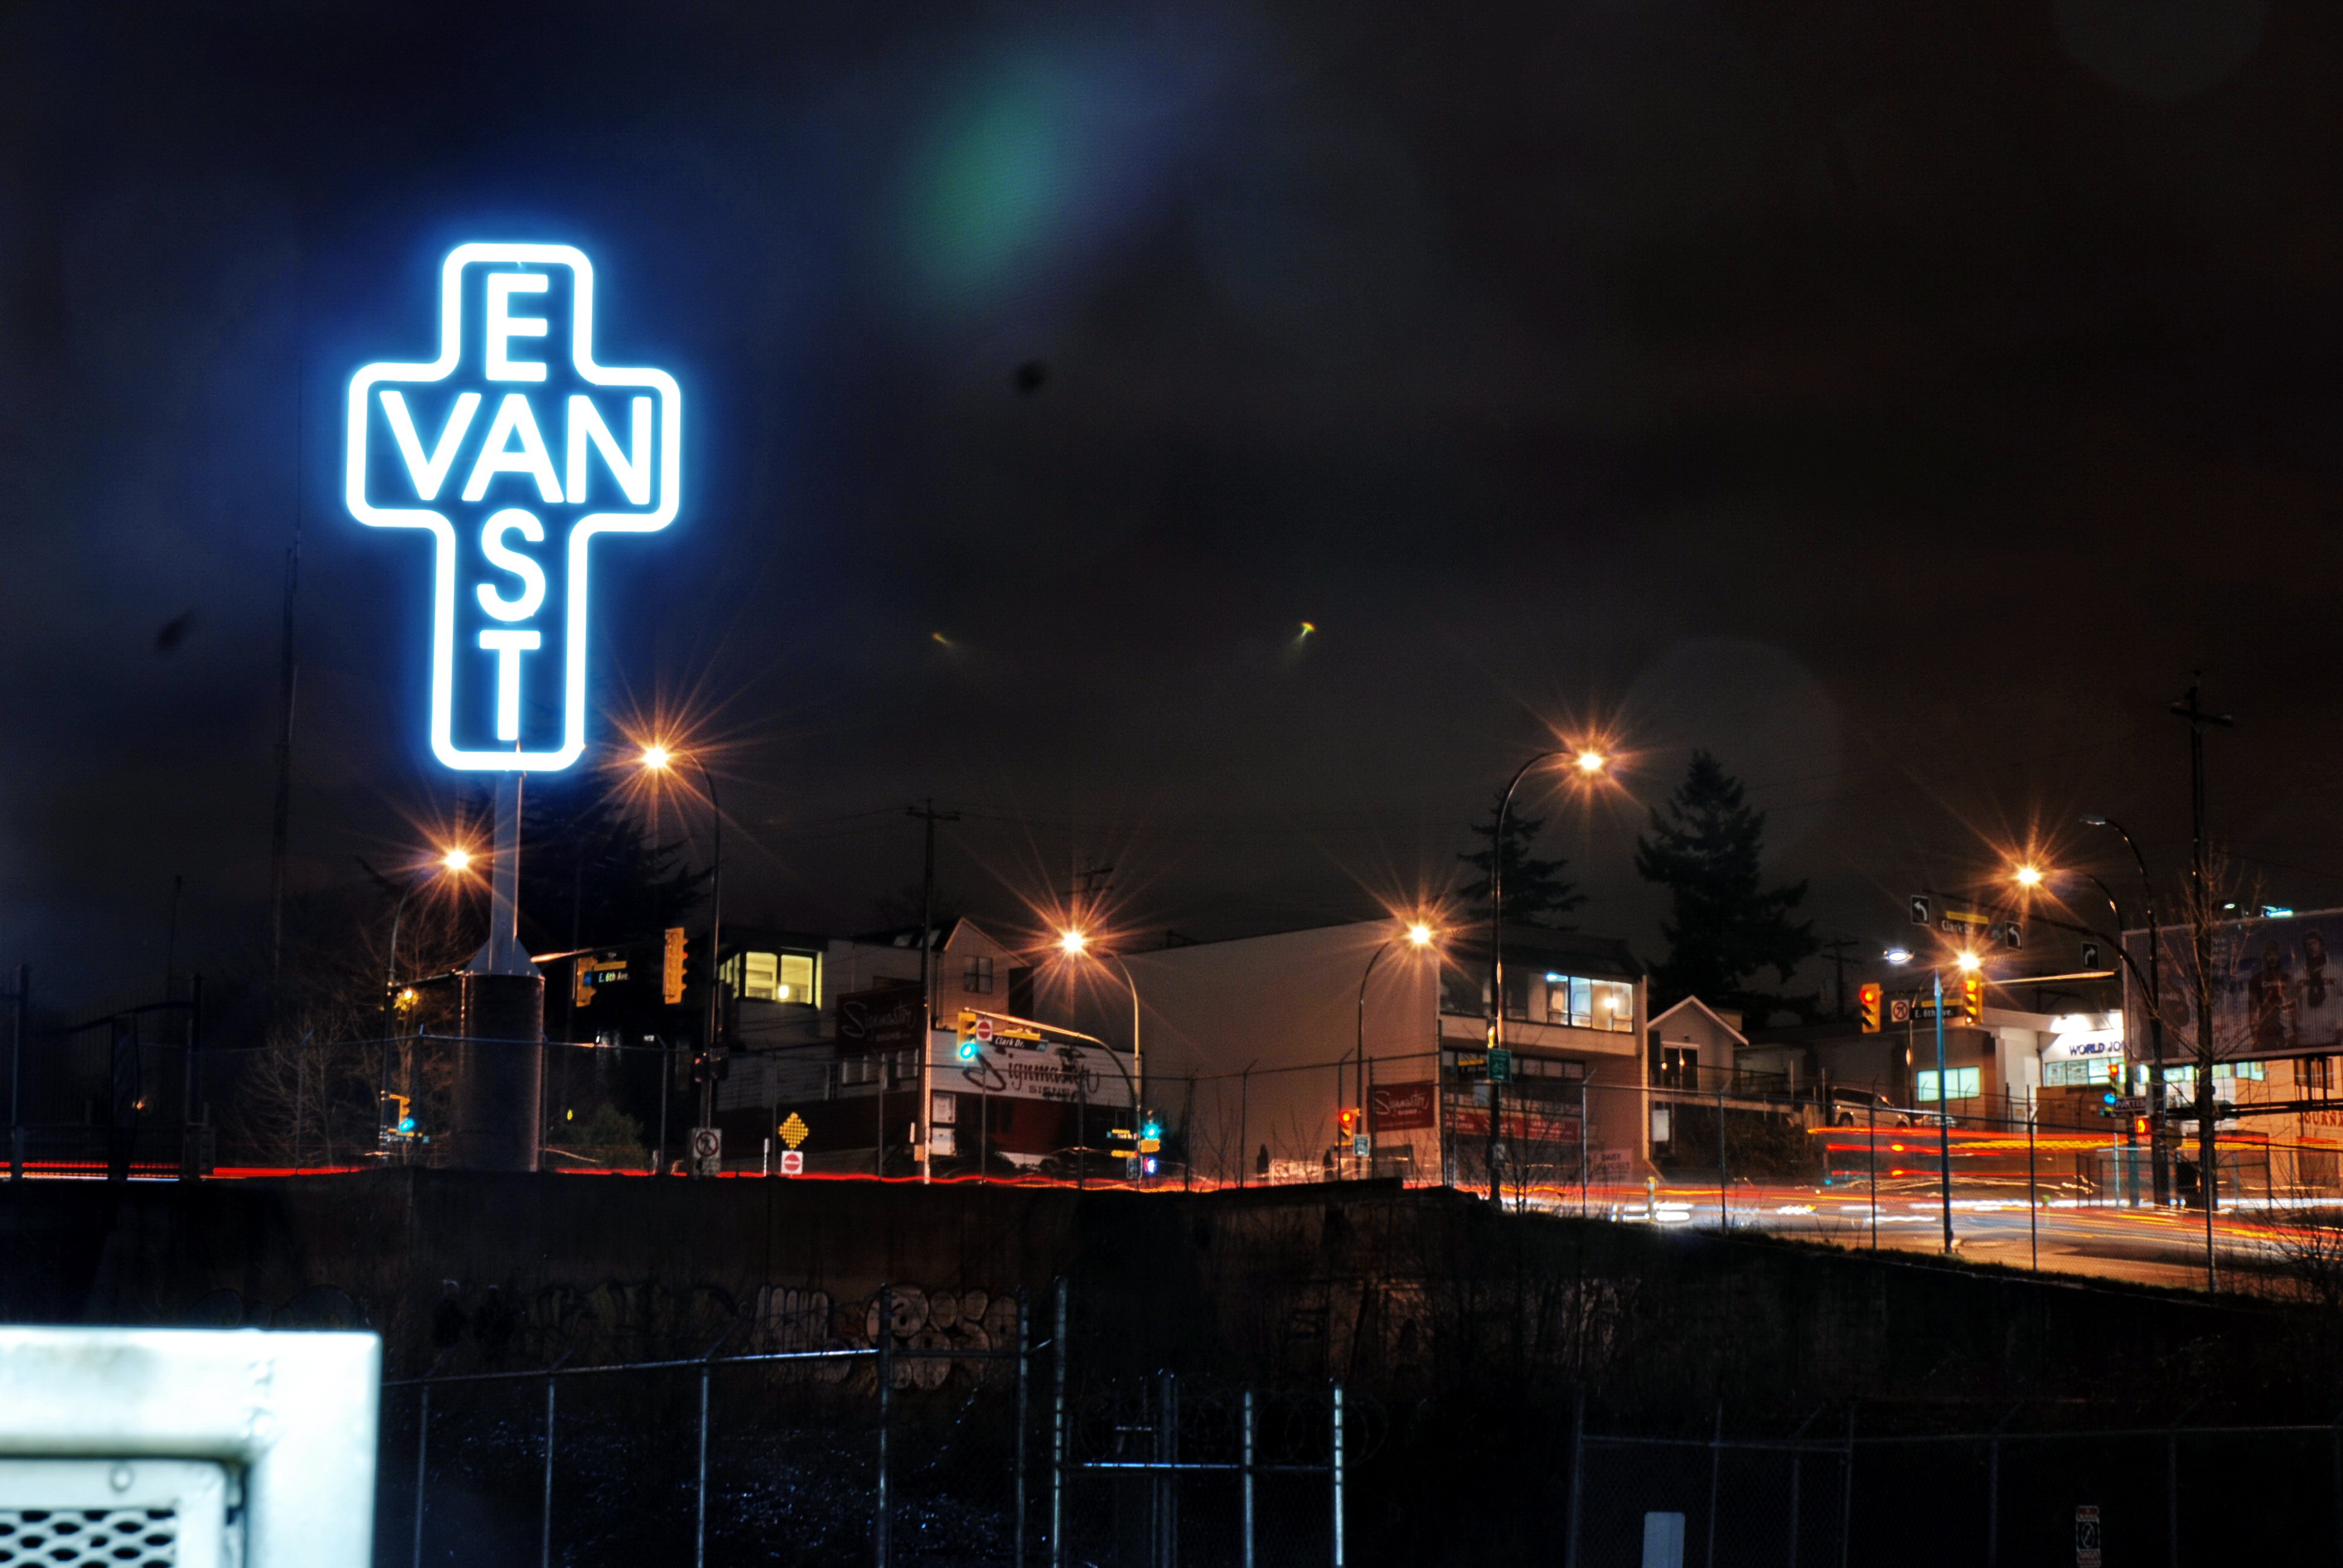 The East Van Sign at night